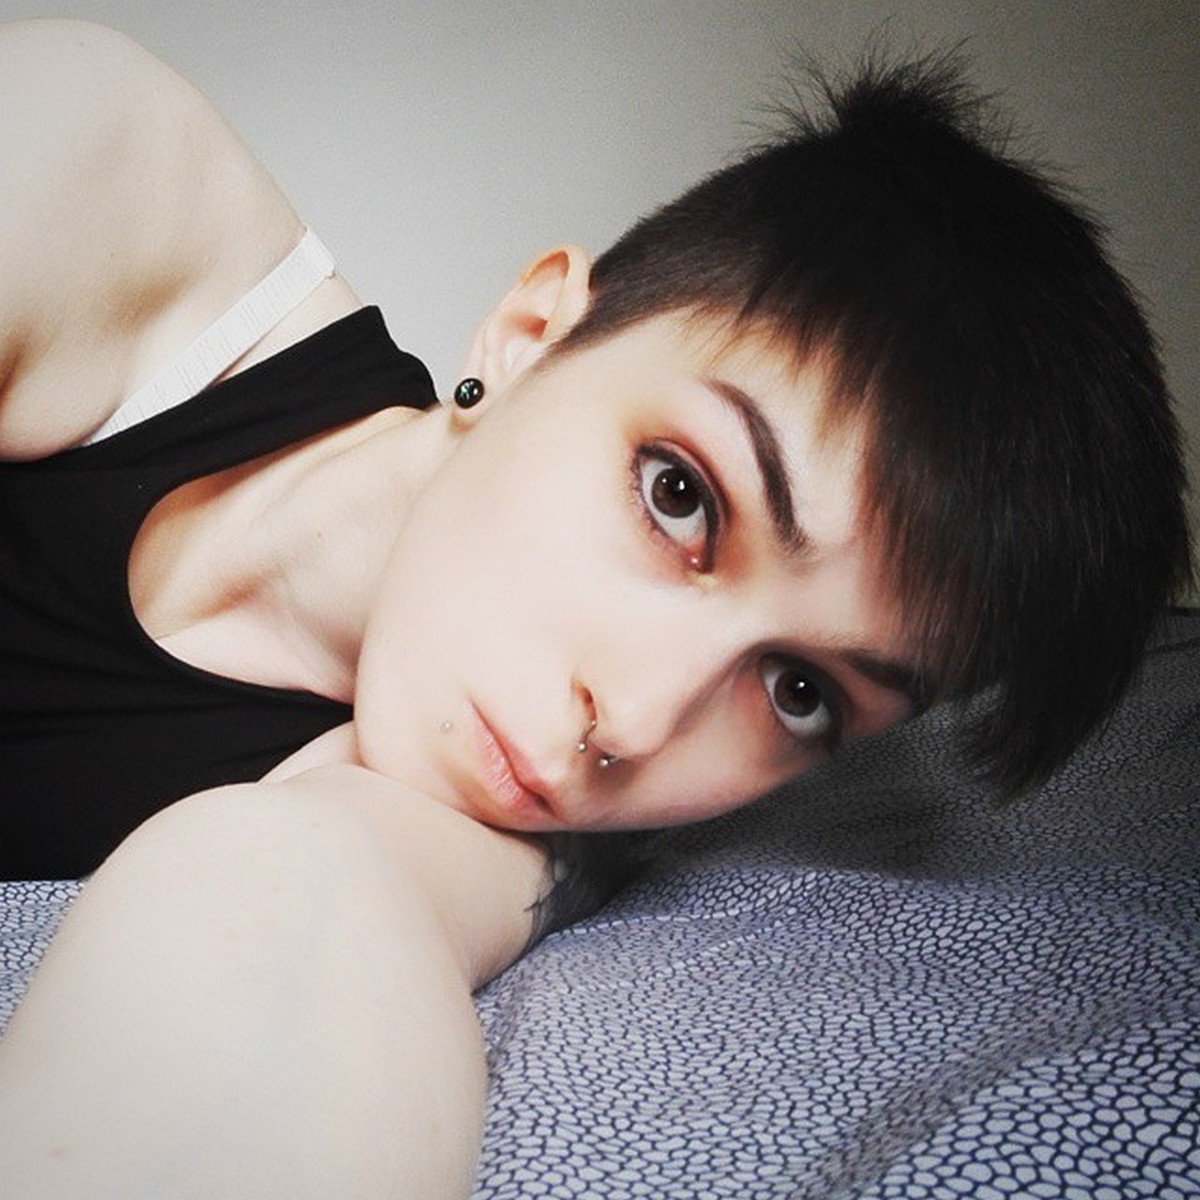 Shaved Pixie Cut For Thick Hair